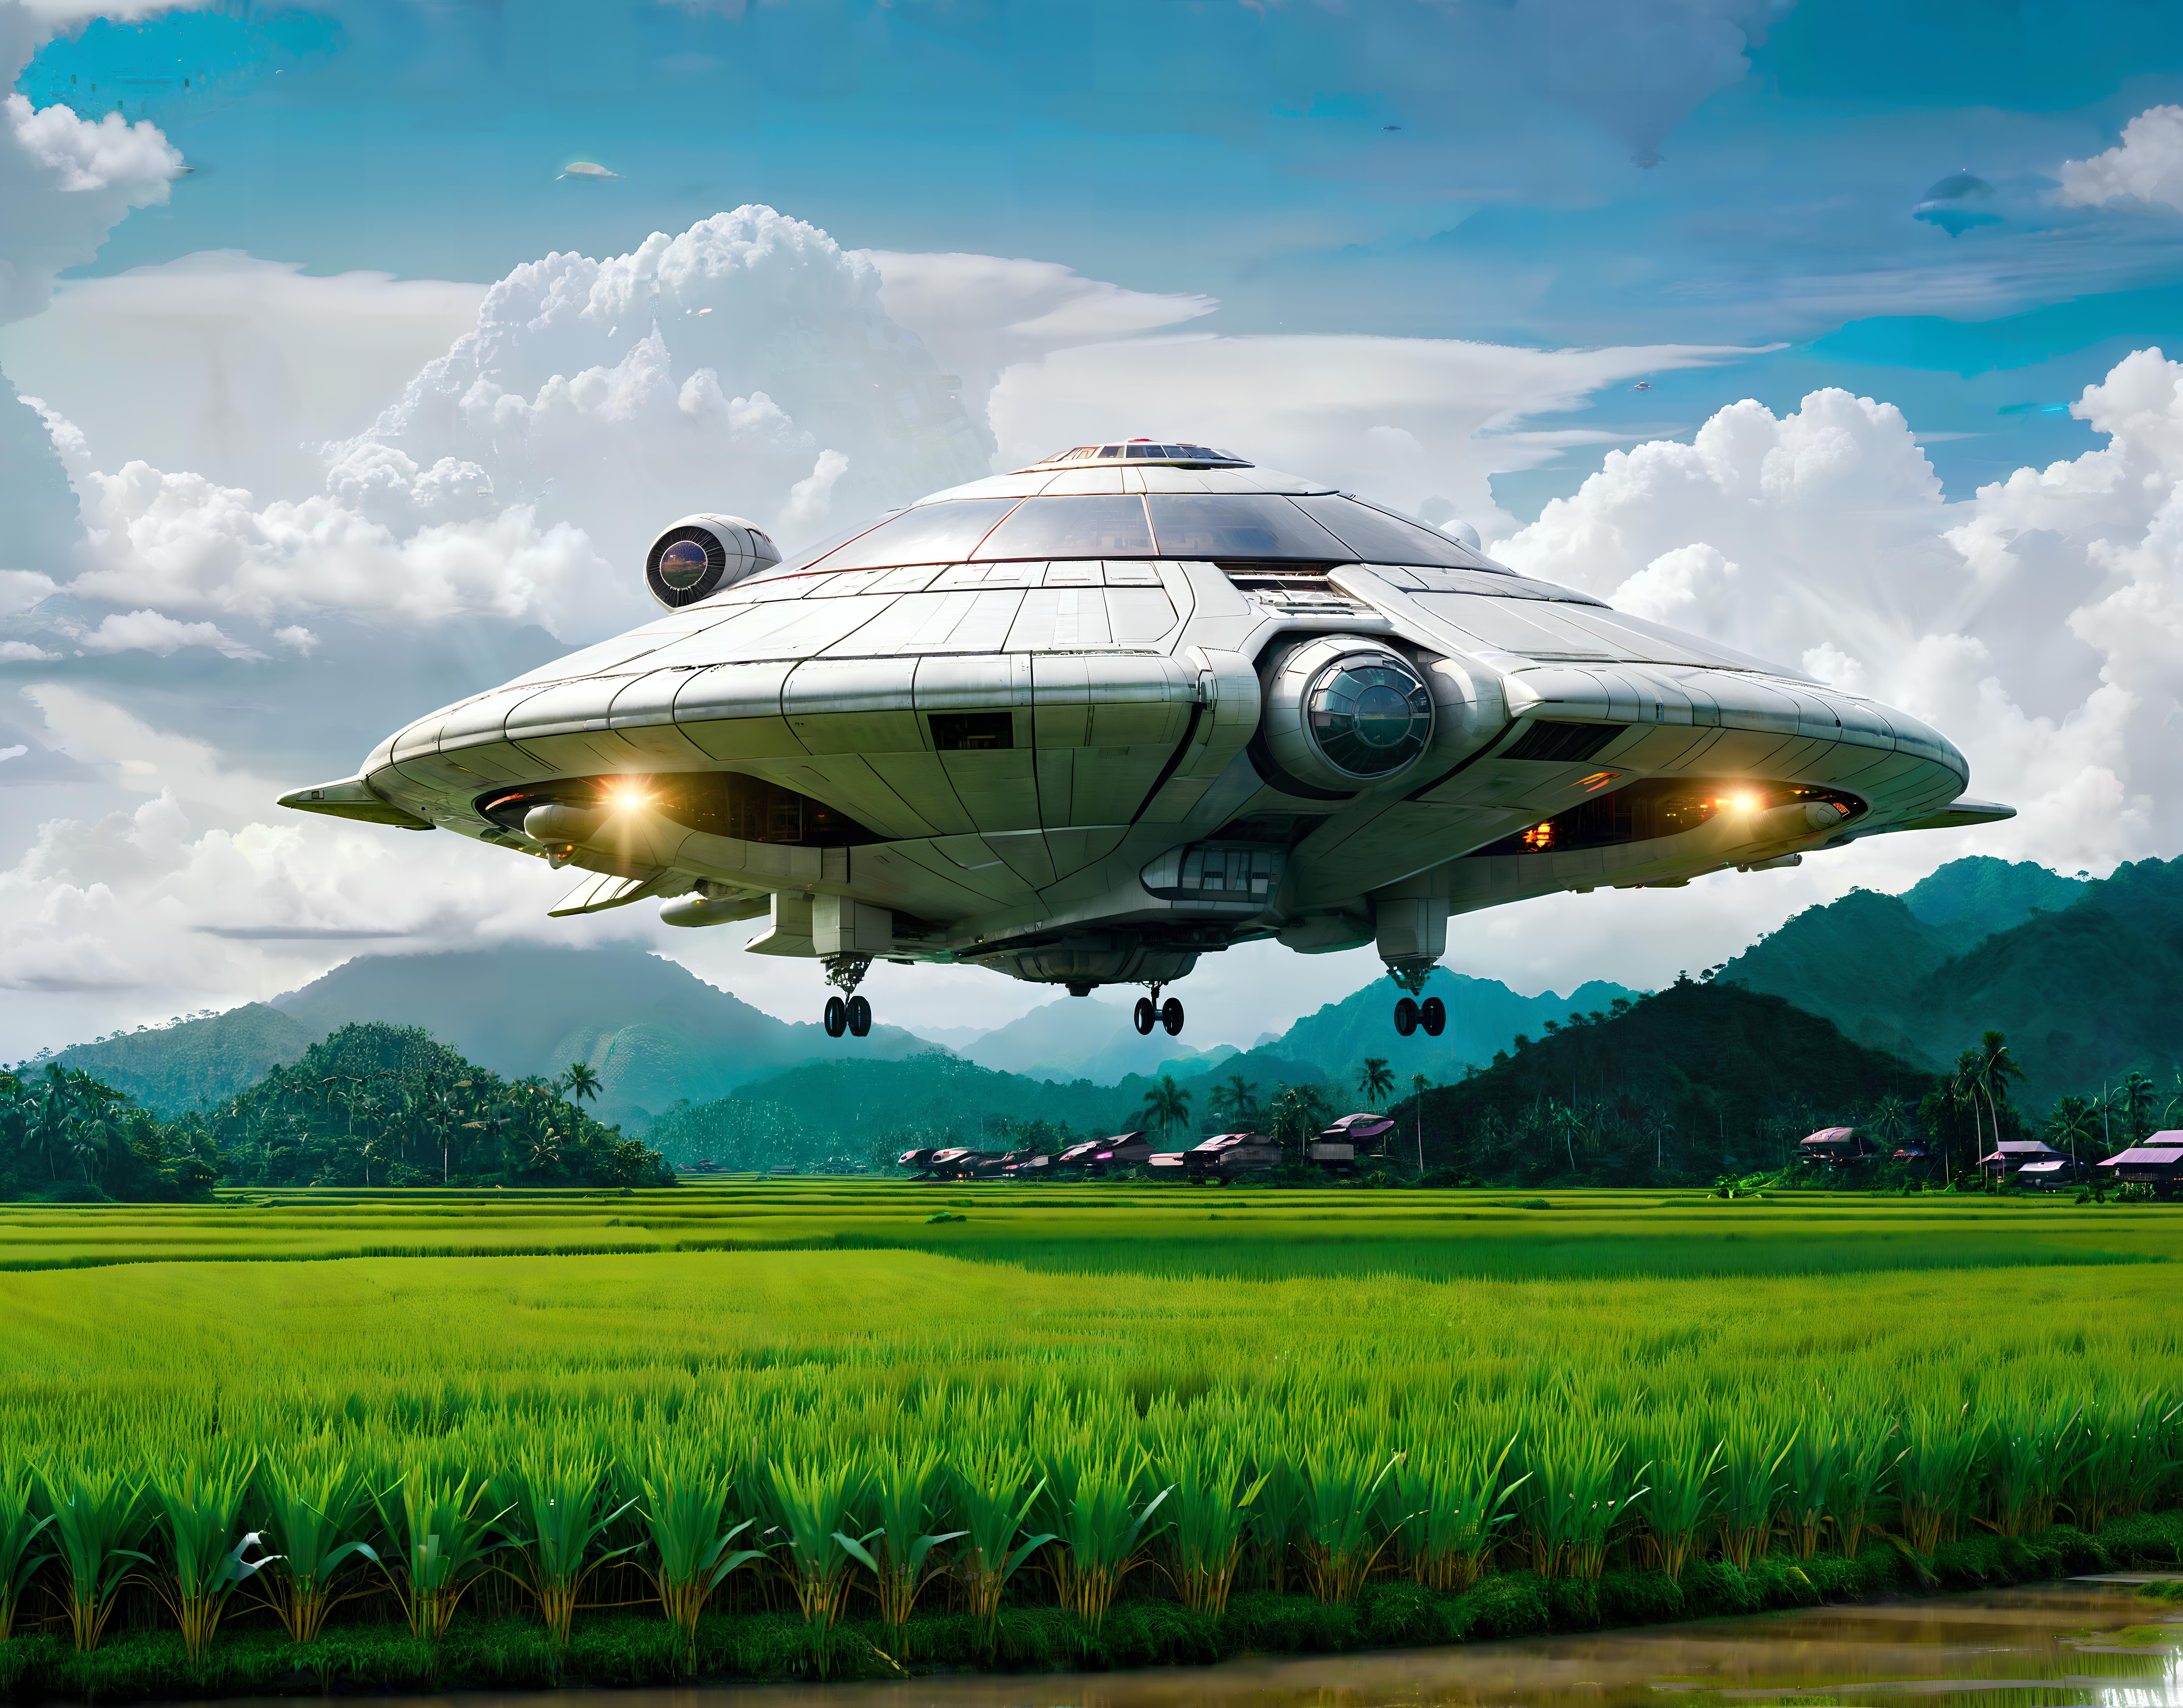 An artistic rendering of a spaceship flying over a lush green field.